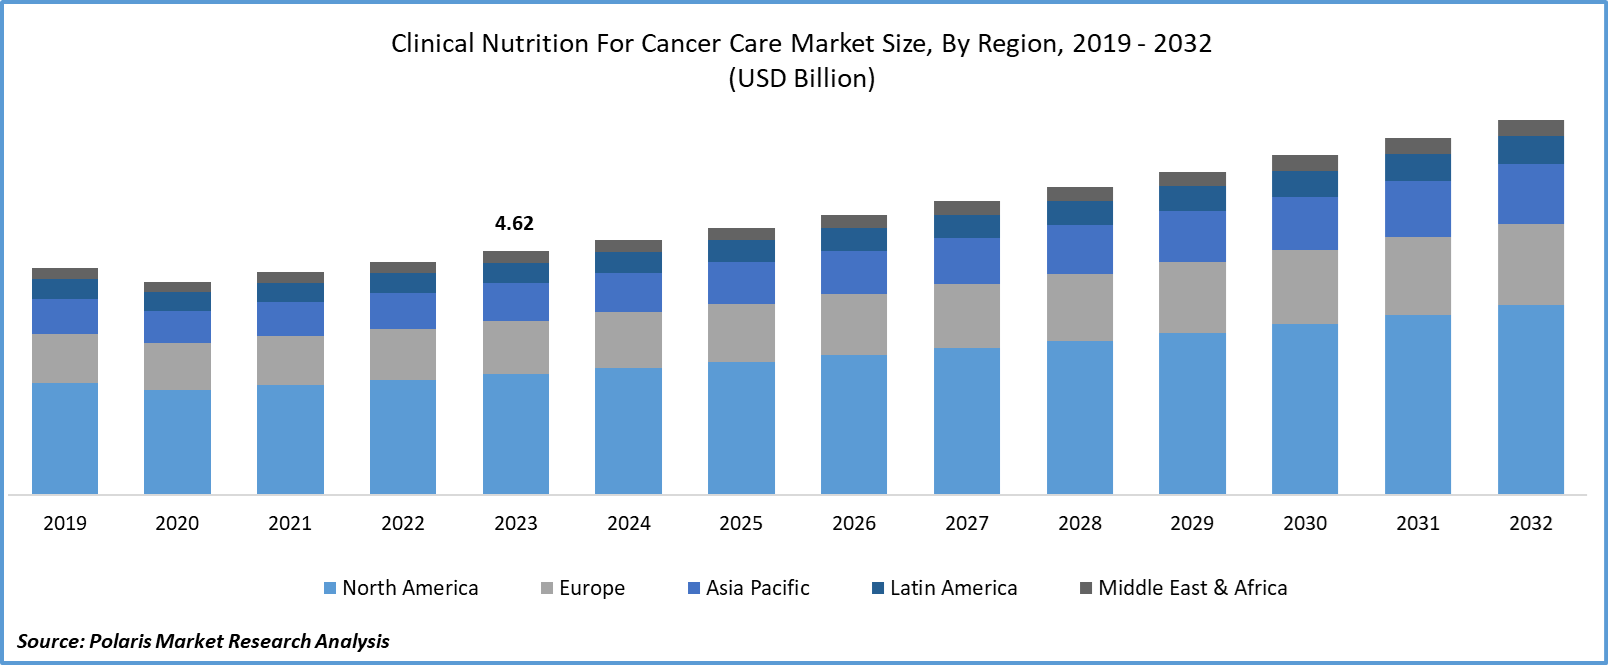 Clinical Nutrition for Cancer Care Market Size